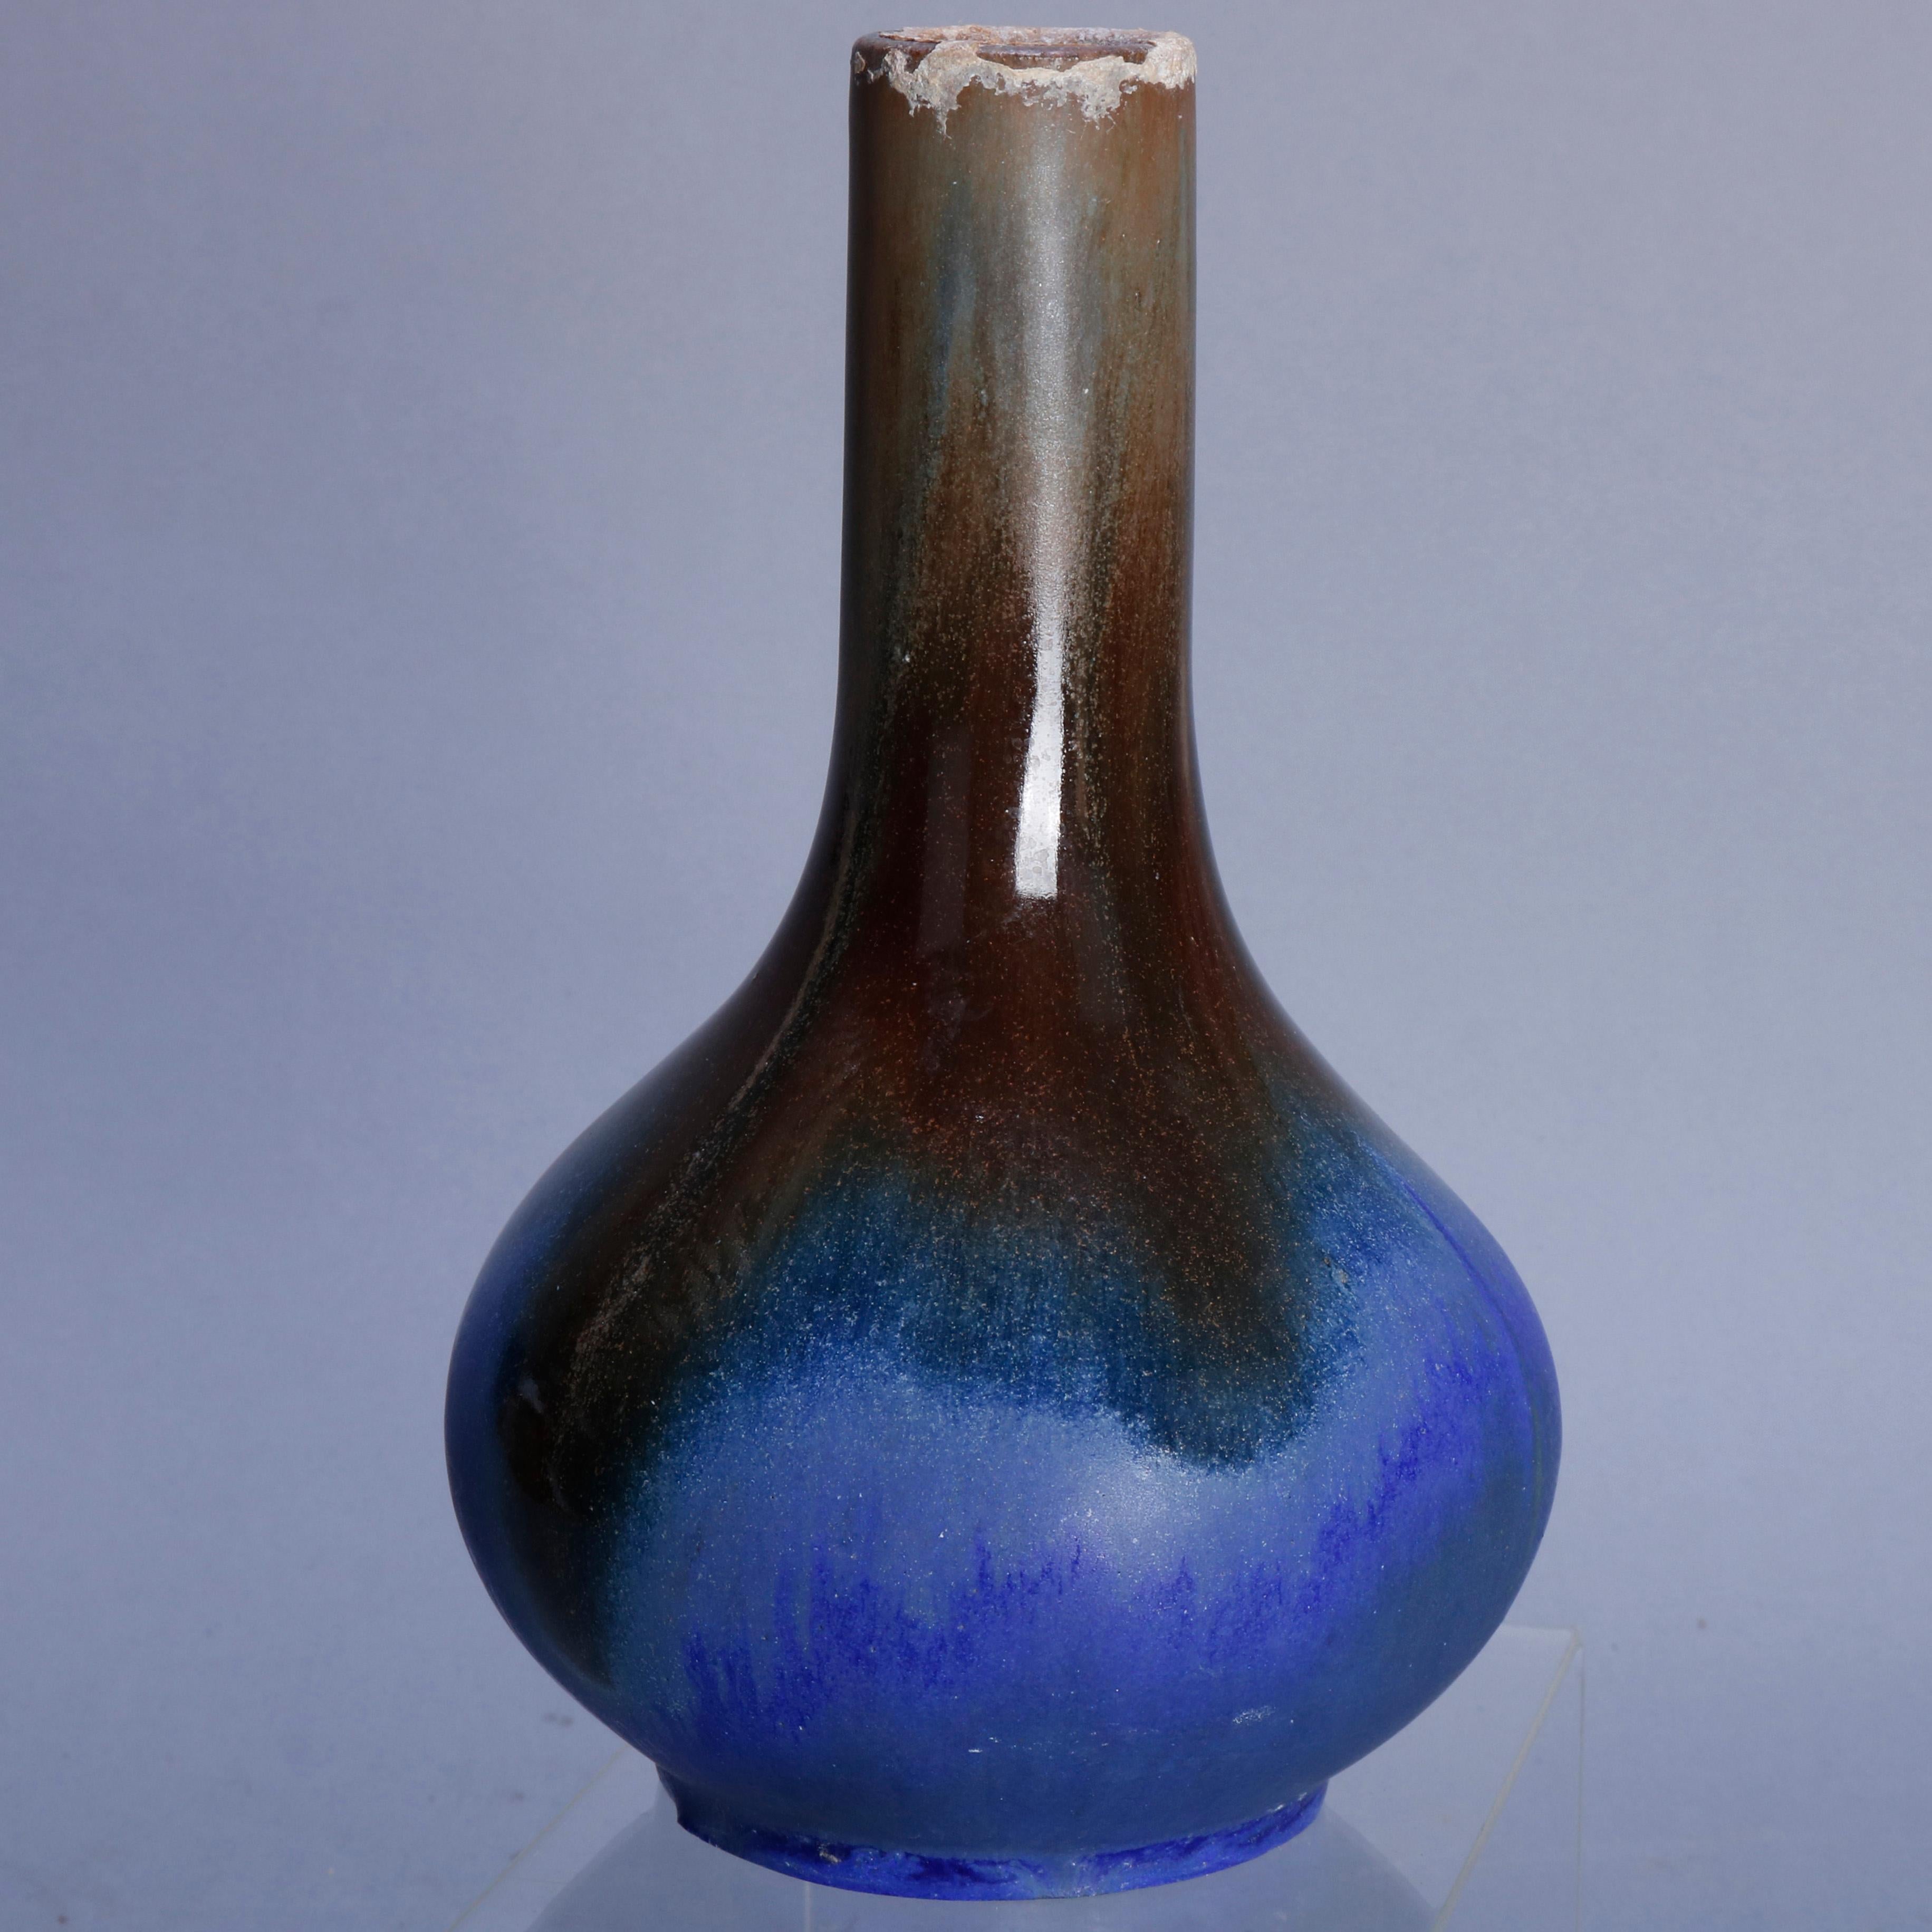 An antique Arts & Crafts art pottery bottle vase by Fulper offers drip glazing, original label on base, circa 1920

***DELIVERY NOTICE – Due to COVID-19 we are employing NO-CONTACT PRACTICES in the transfer of purchased items.  Additionally, for